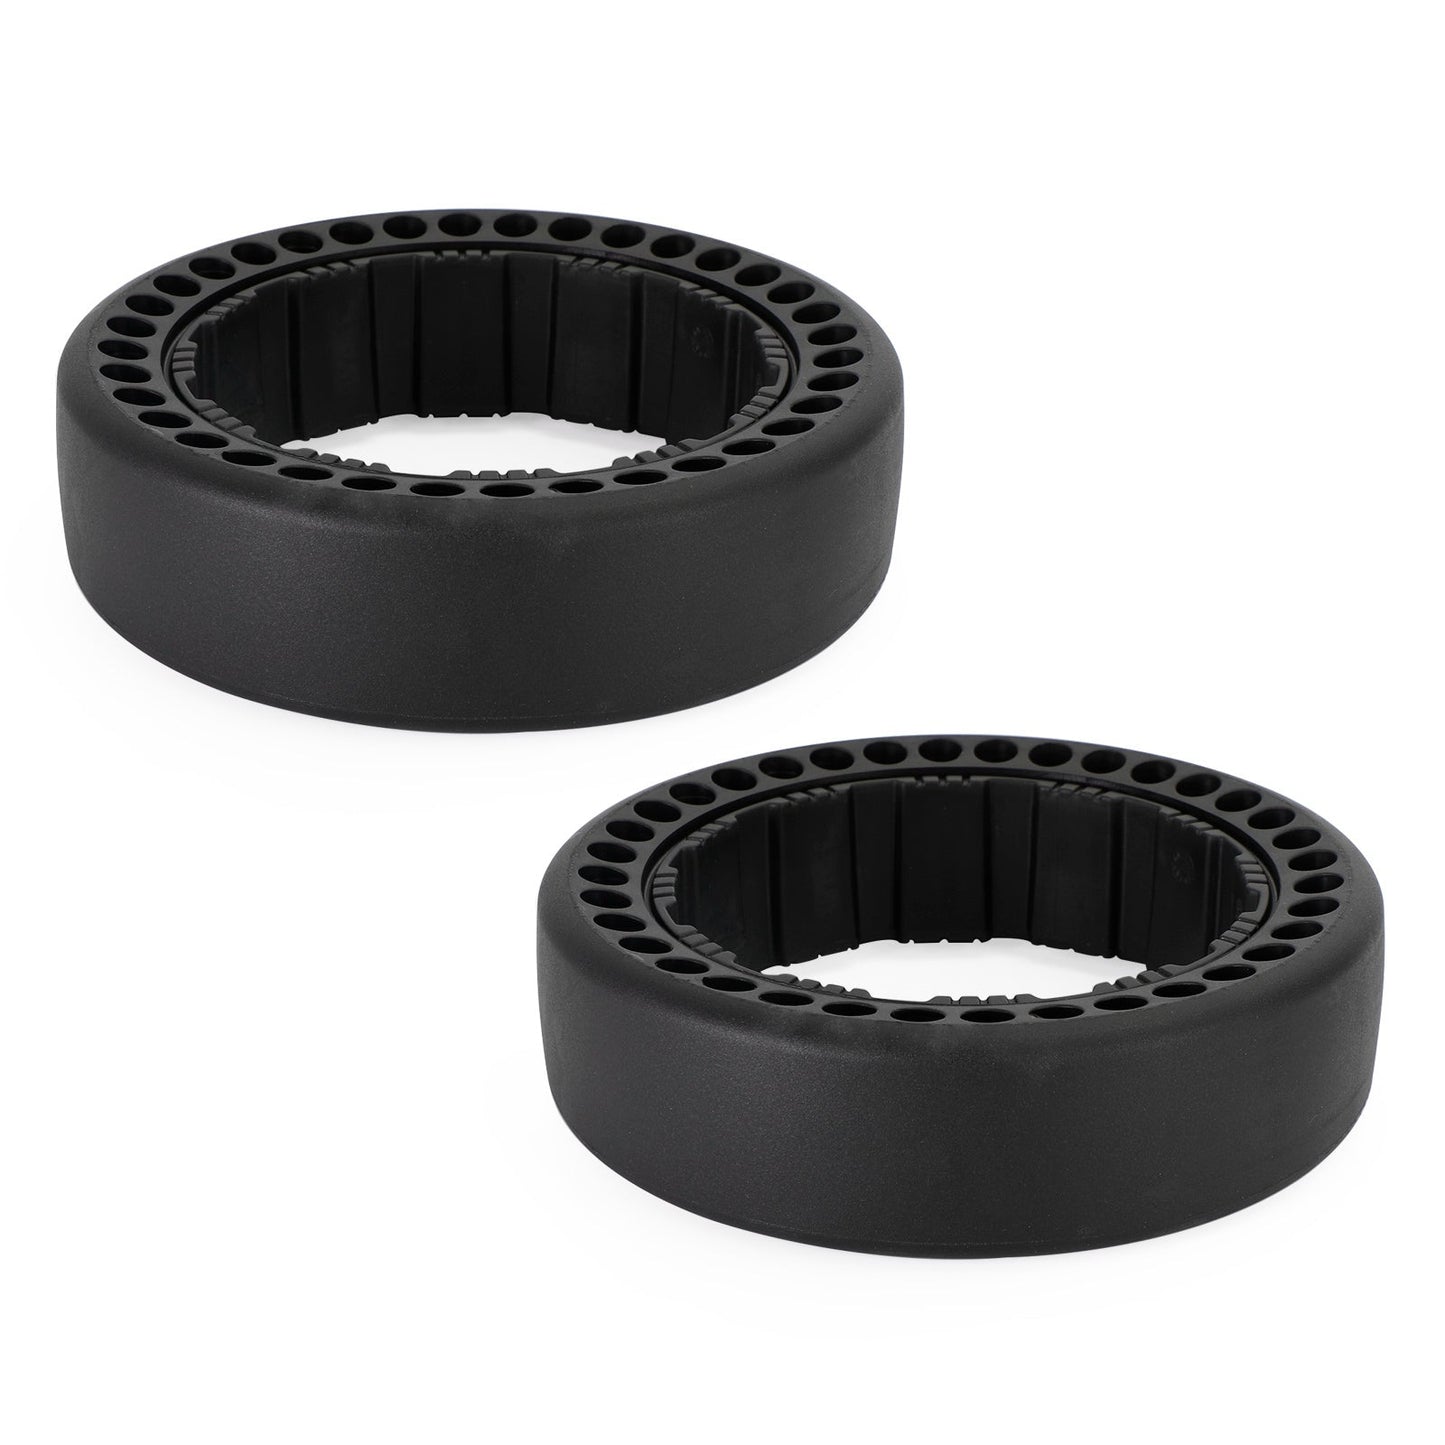 2PCS Drifting Rear Tire For Segway Ninebot Gokart Pro S MAX Replacement